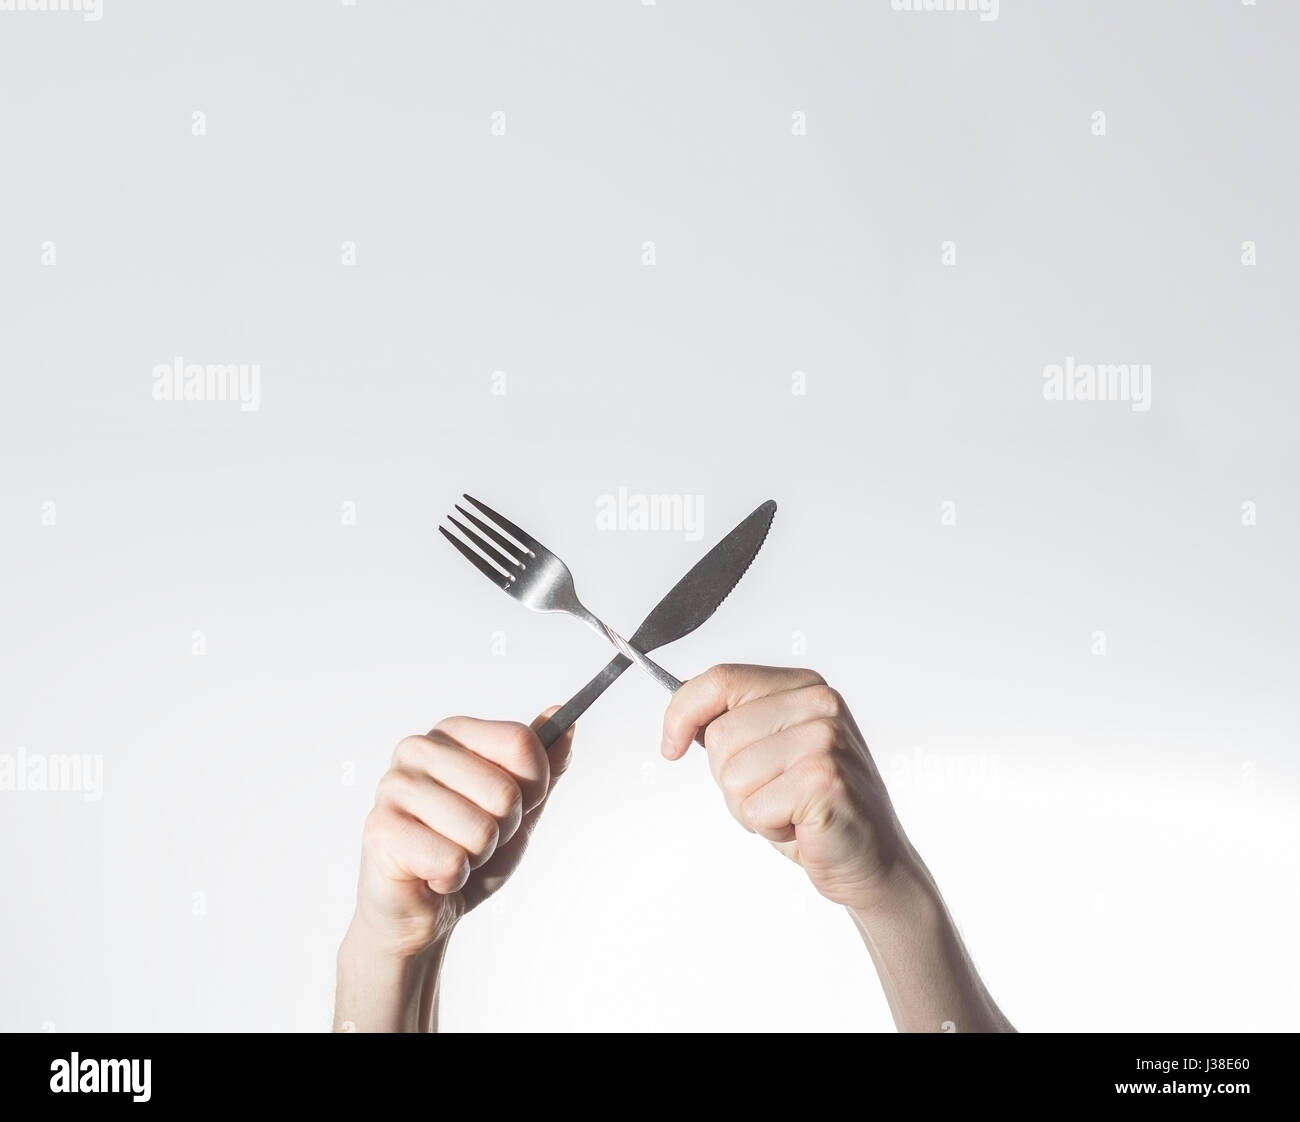 breakfast concept, hands hold knife and fork crosed,  Space for text, free space, Stock Photo